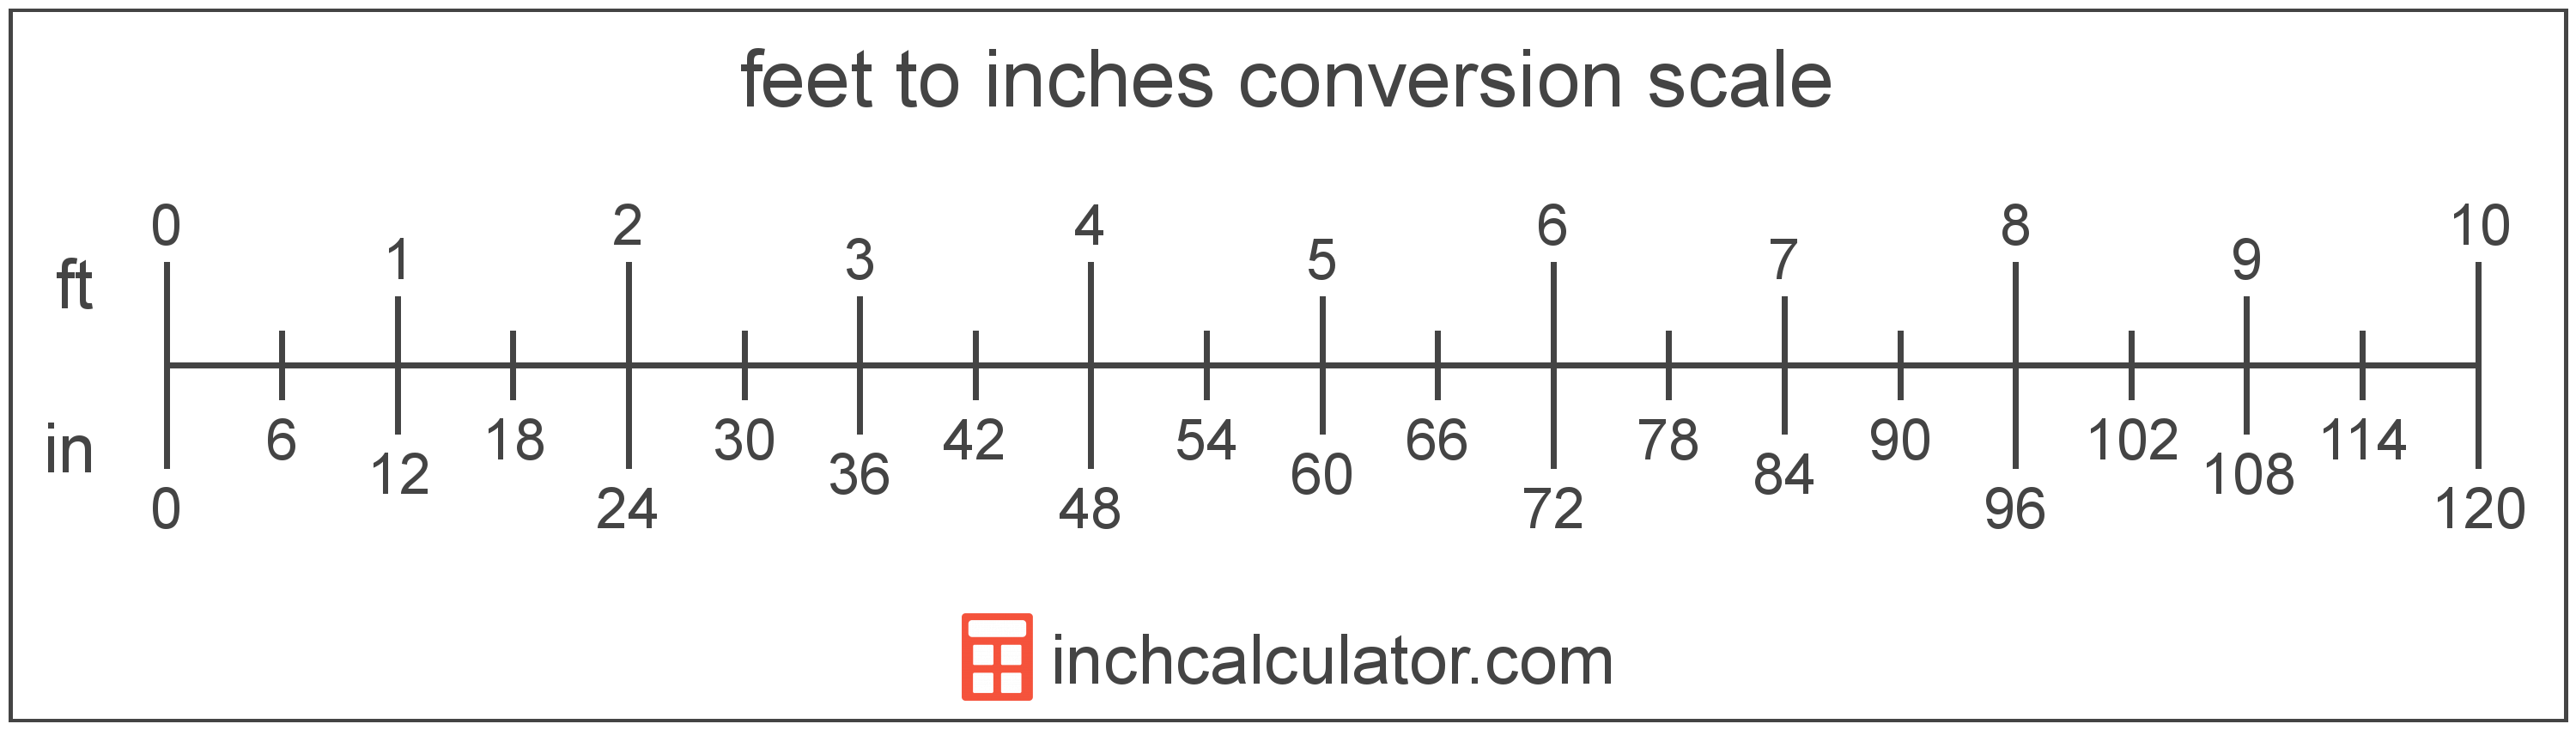 Feet to Inches Conversion Calculator (ft to in) - Inch Calculator